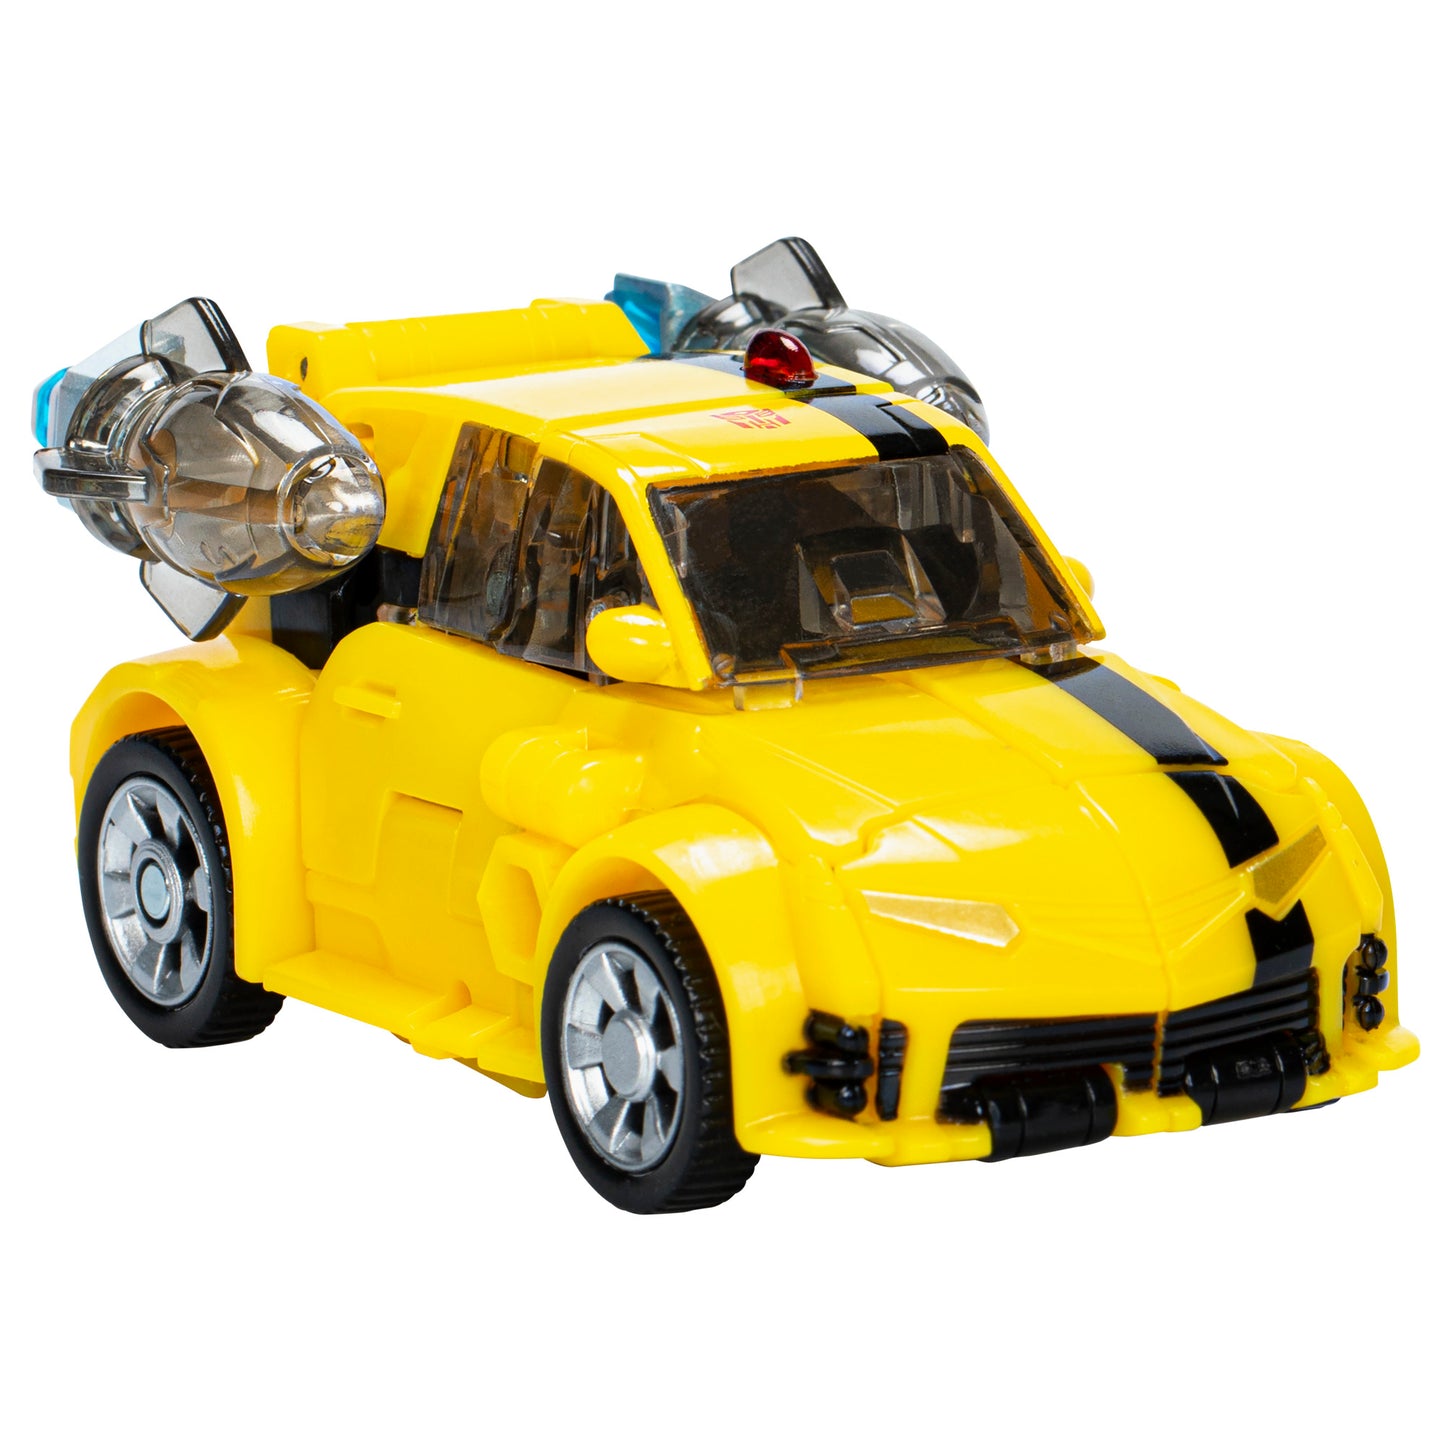 Transformers Legacy United Deluxe Animated Universe Bumblebee 5.5” Action Figure, 8+ heretoserveyou 2